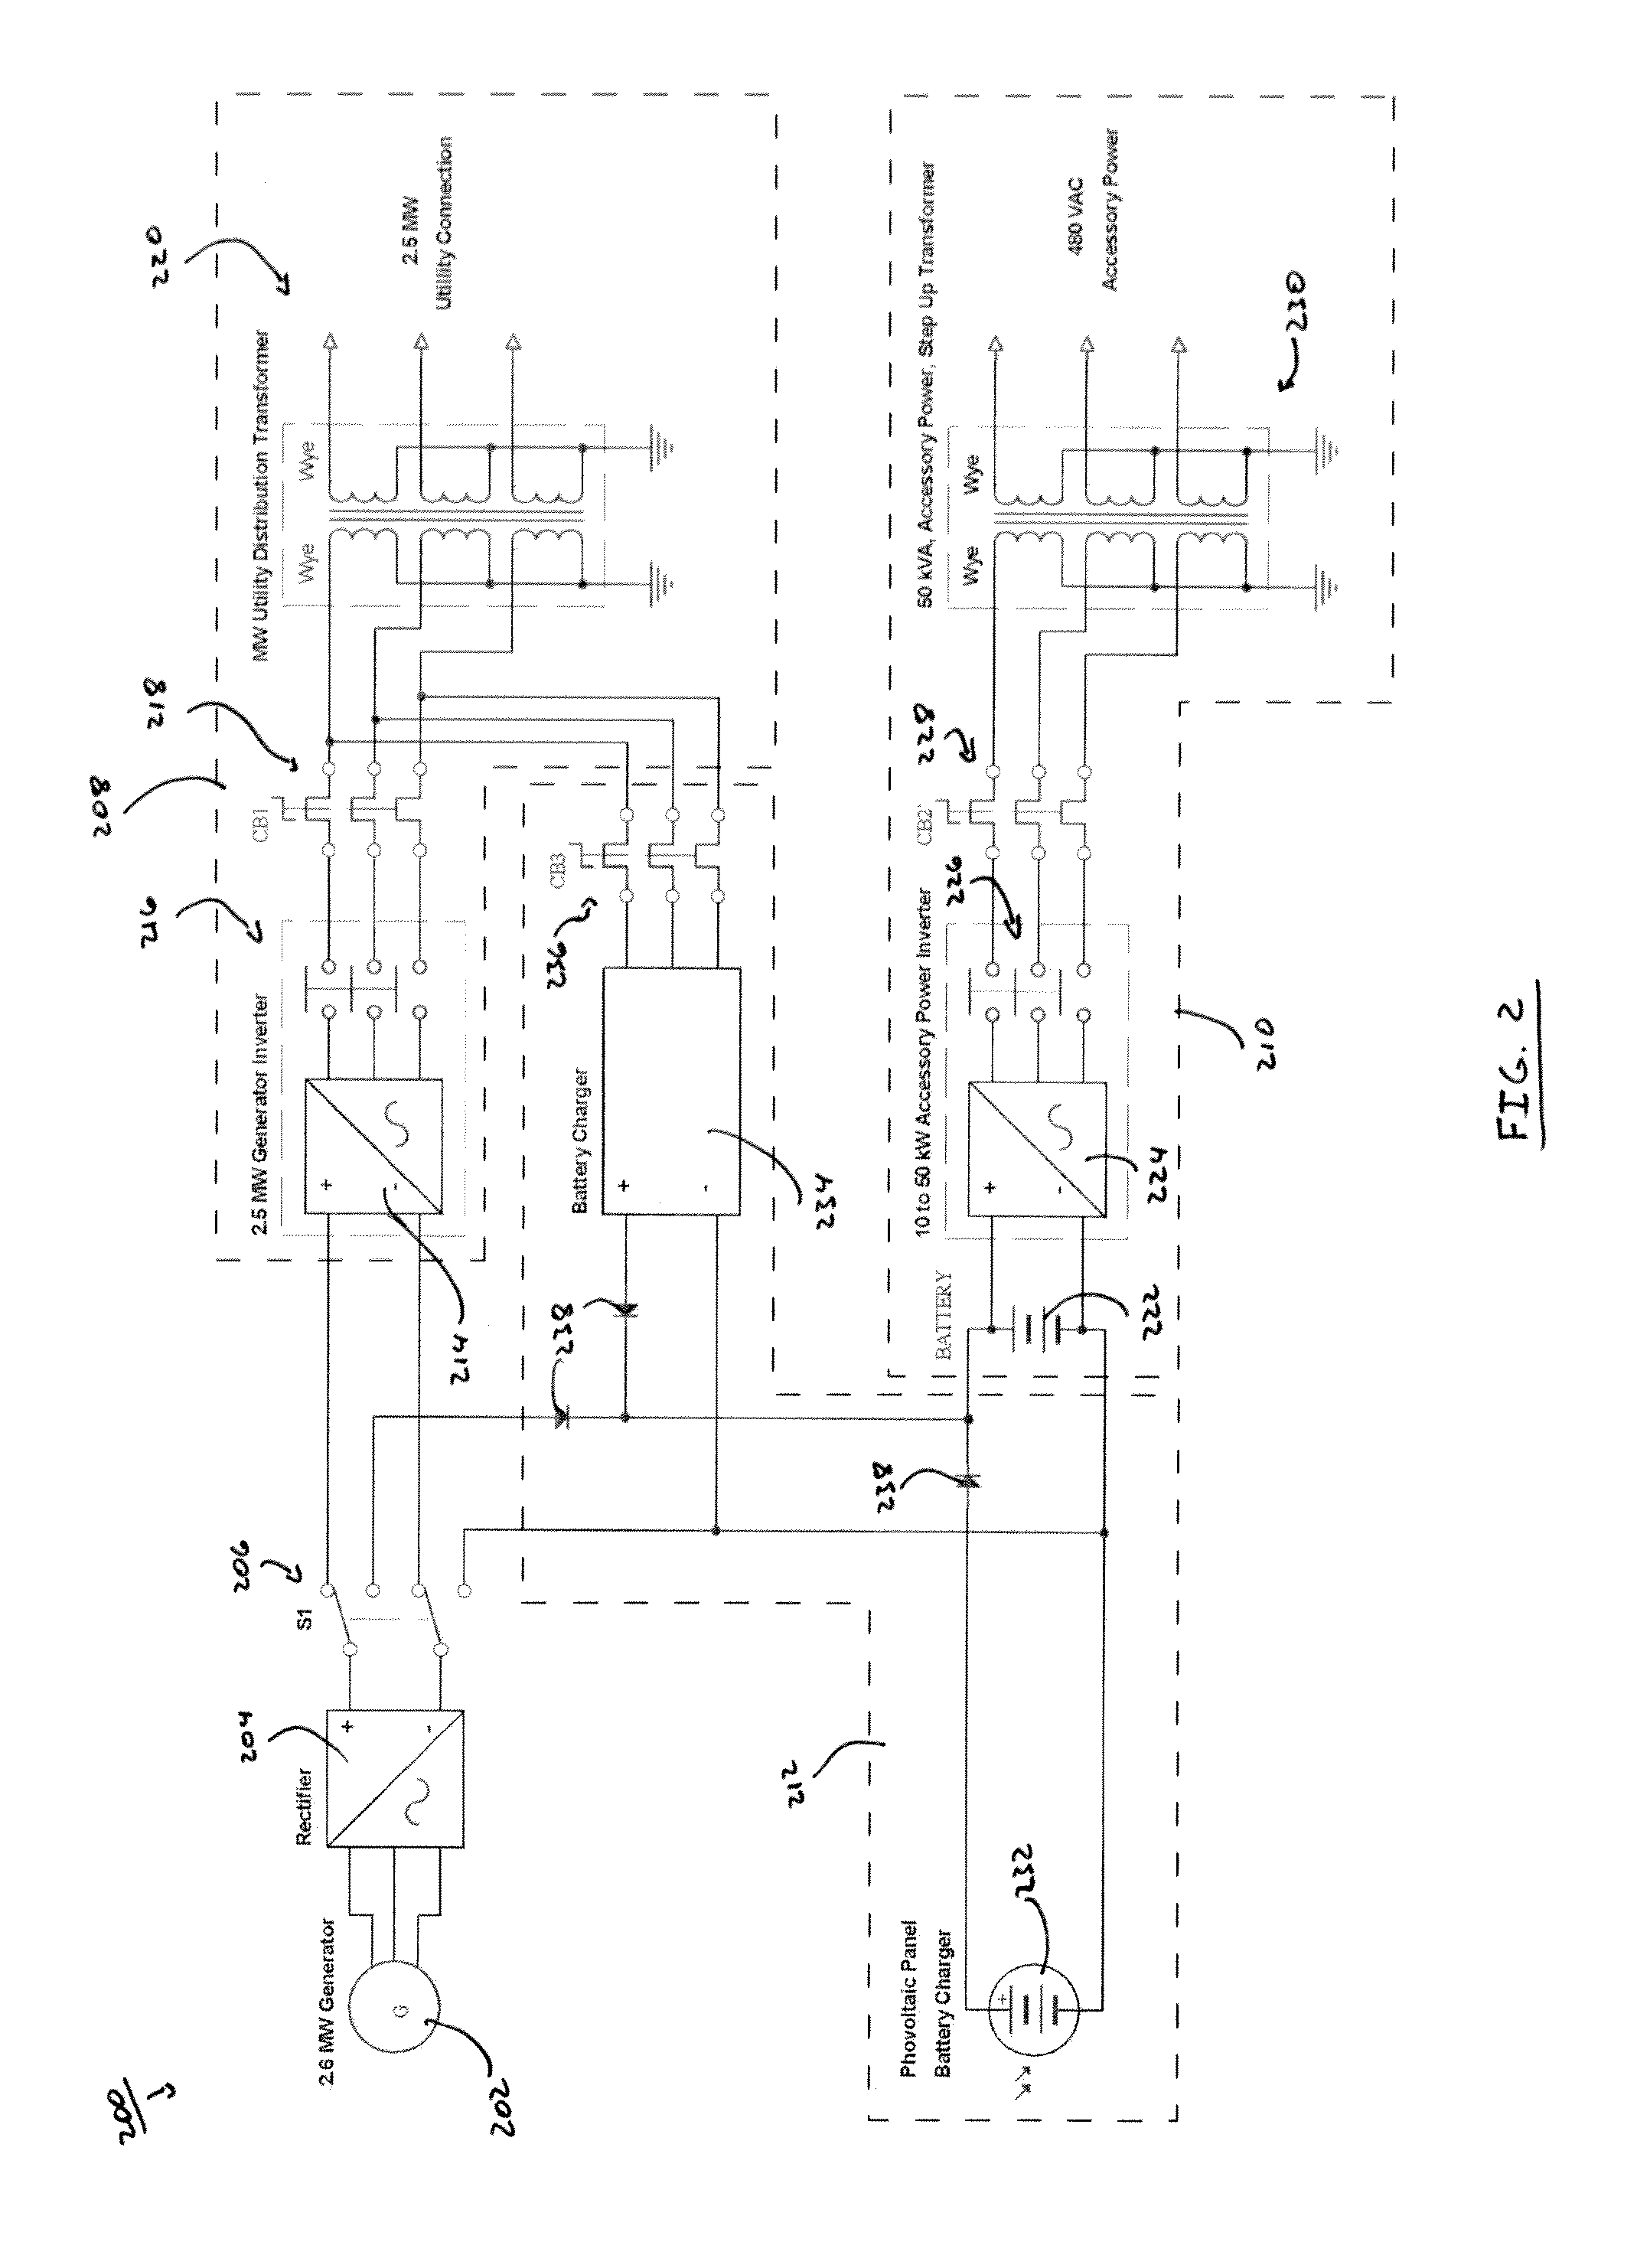 Stand alone operation system for use with utility grade synchronous wind turbine generators